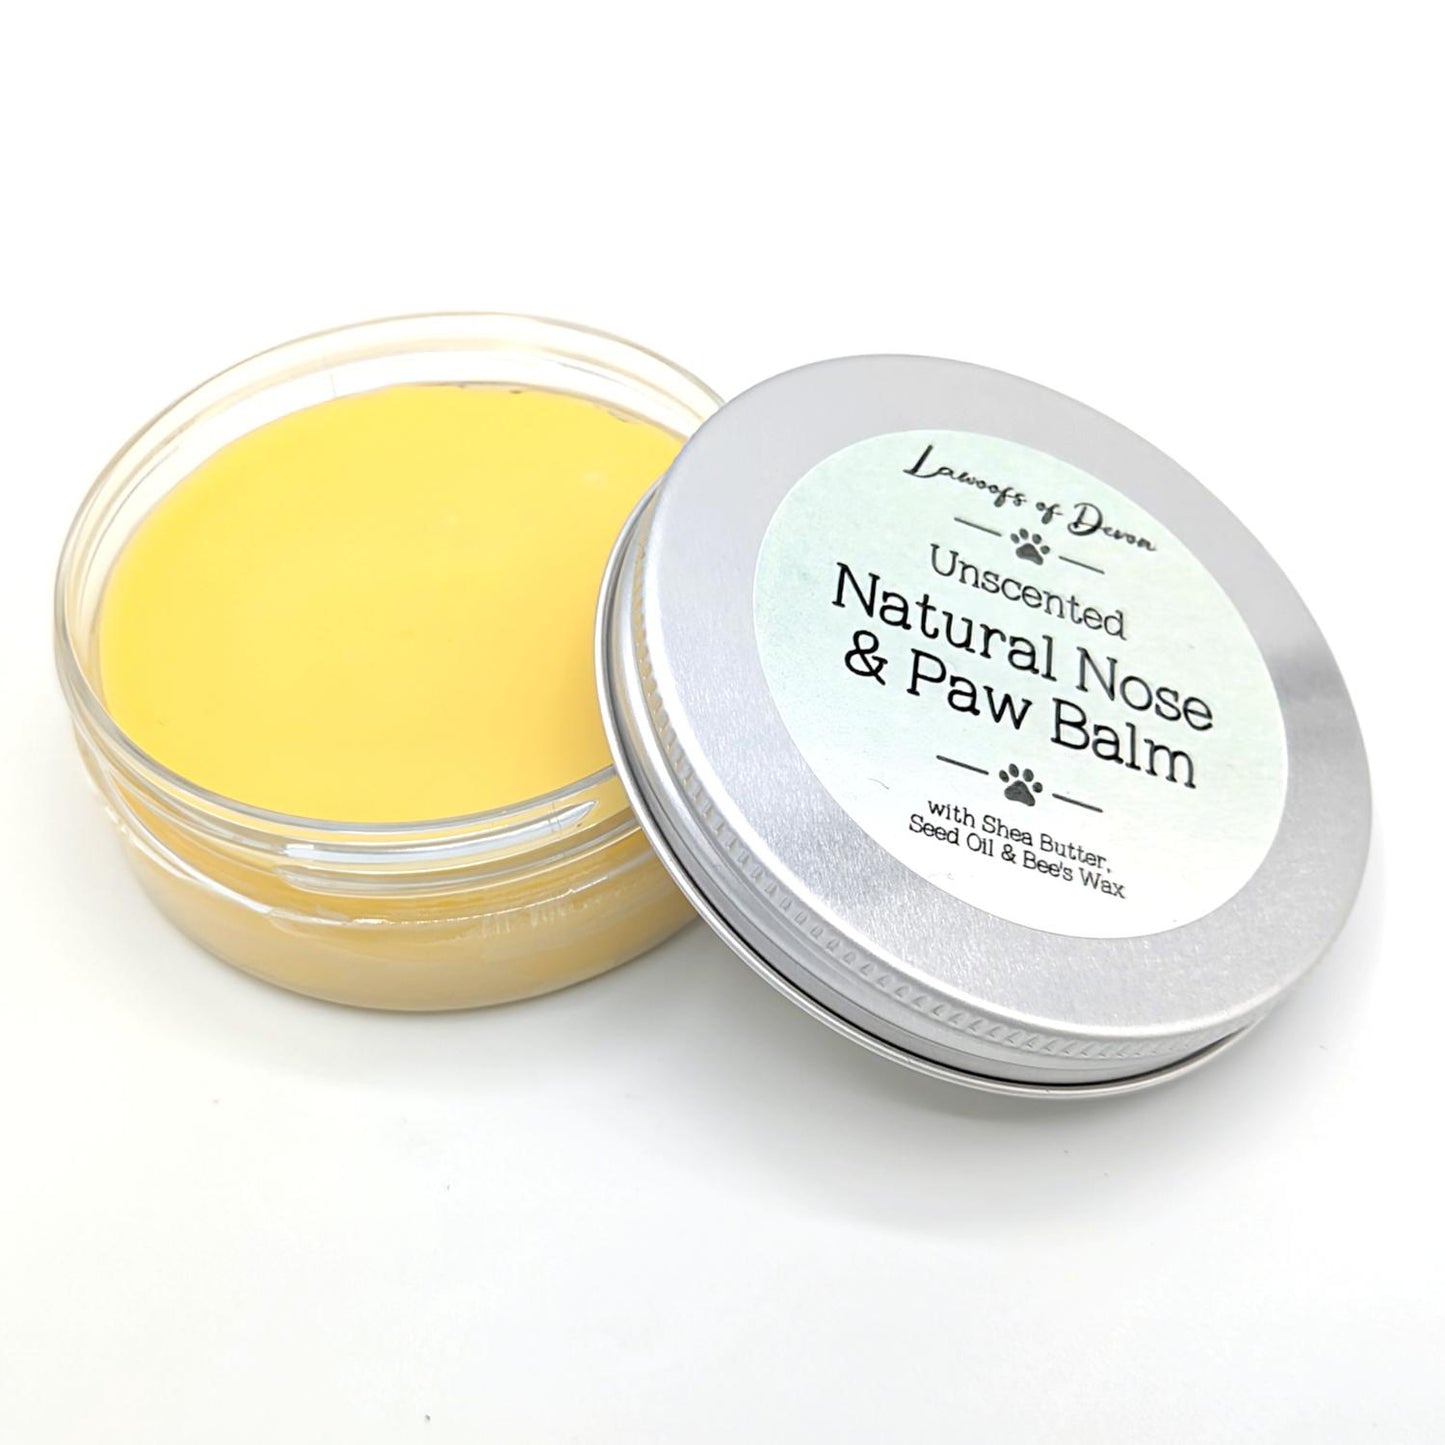 Lawoofs of Devon - Unscented Natural Nose and Paw Balm